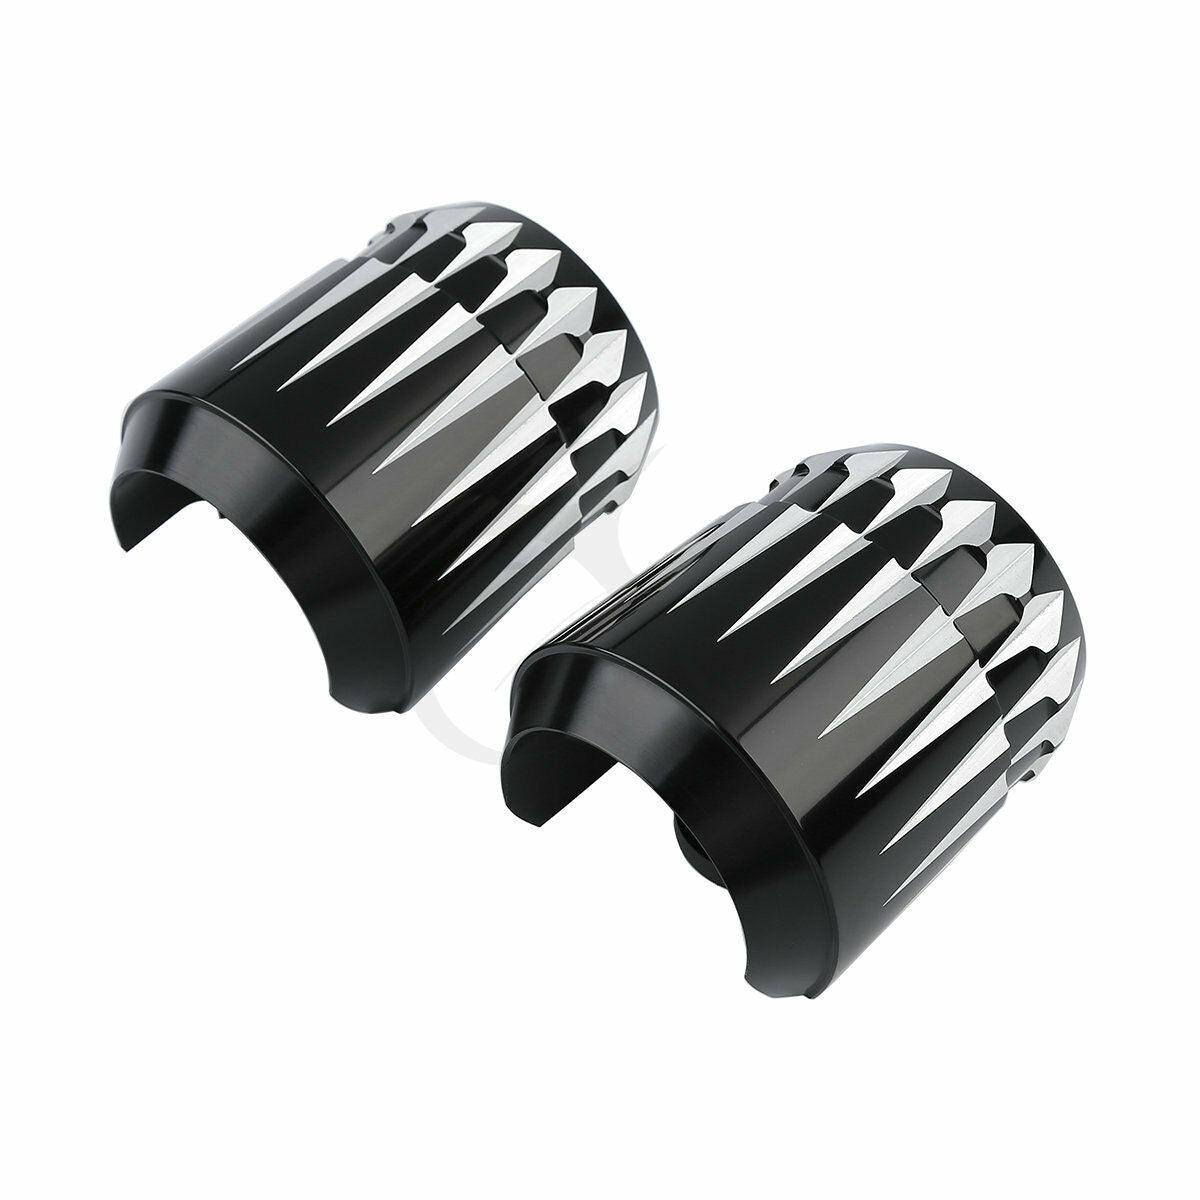 Black Lower Fork Slider Covers Fit For Harley Road Street Glide 84-13 Aluminum - Moto Life Products